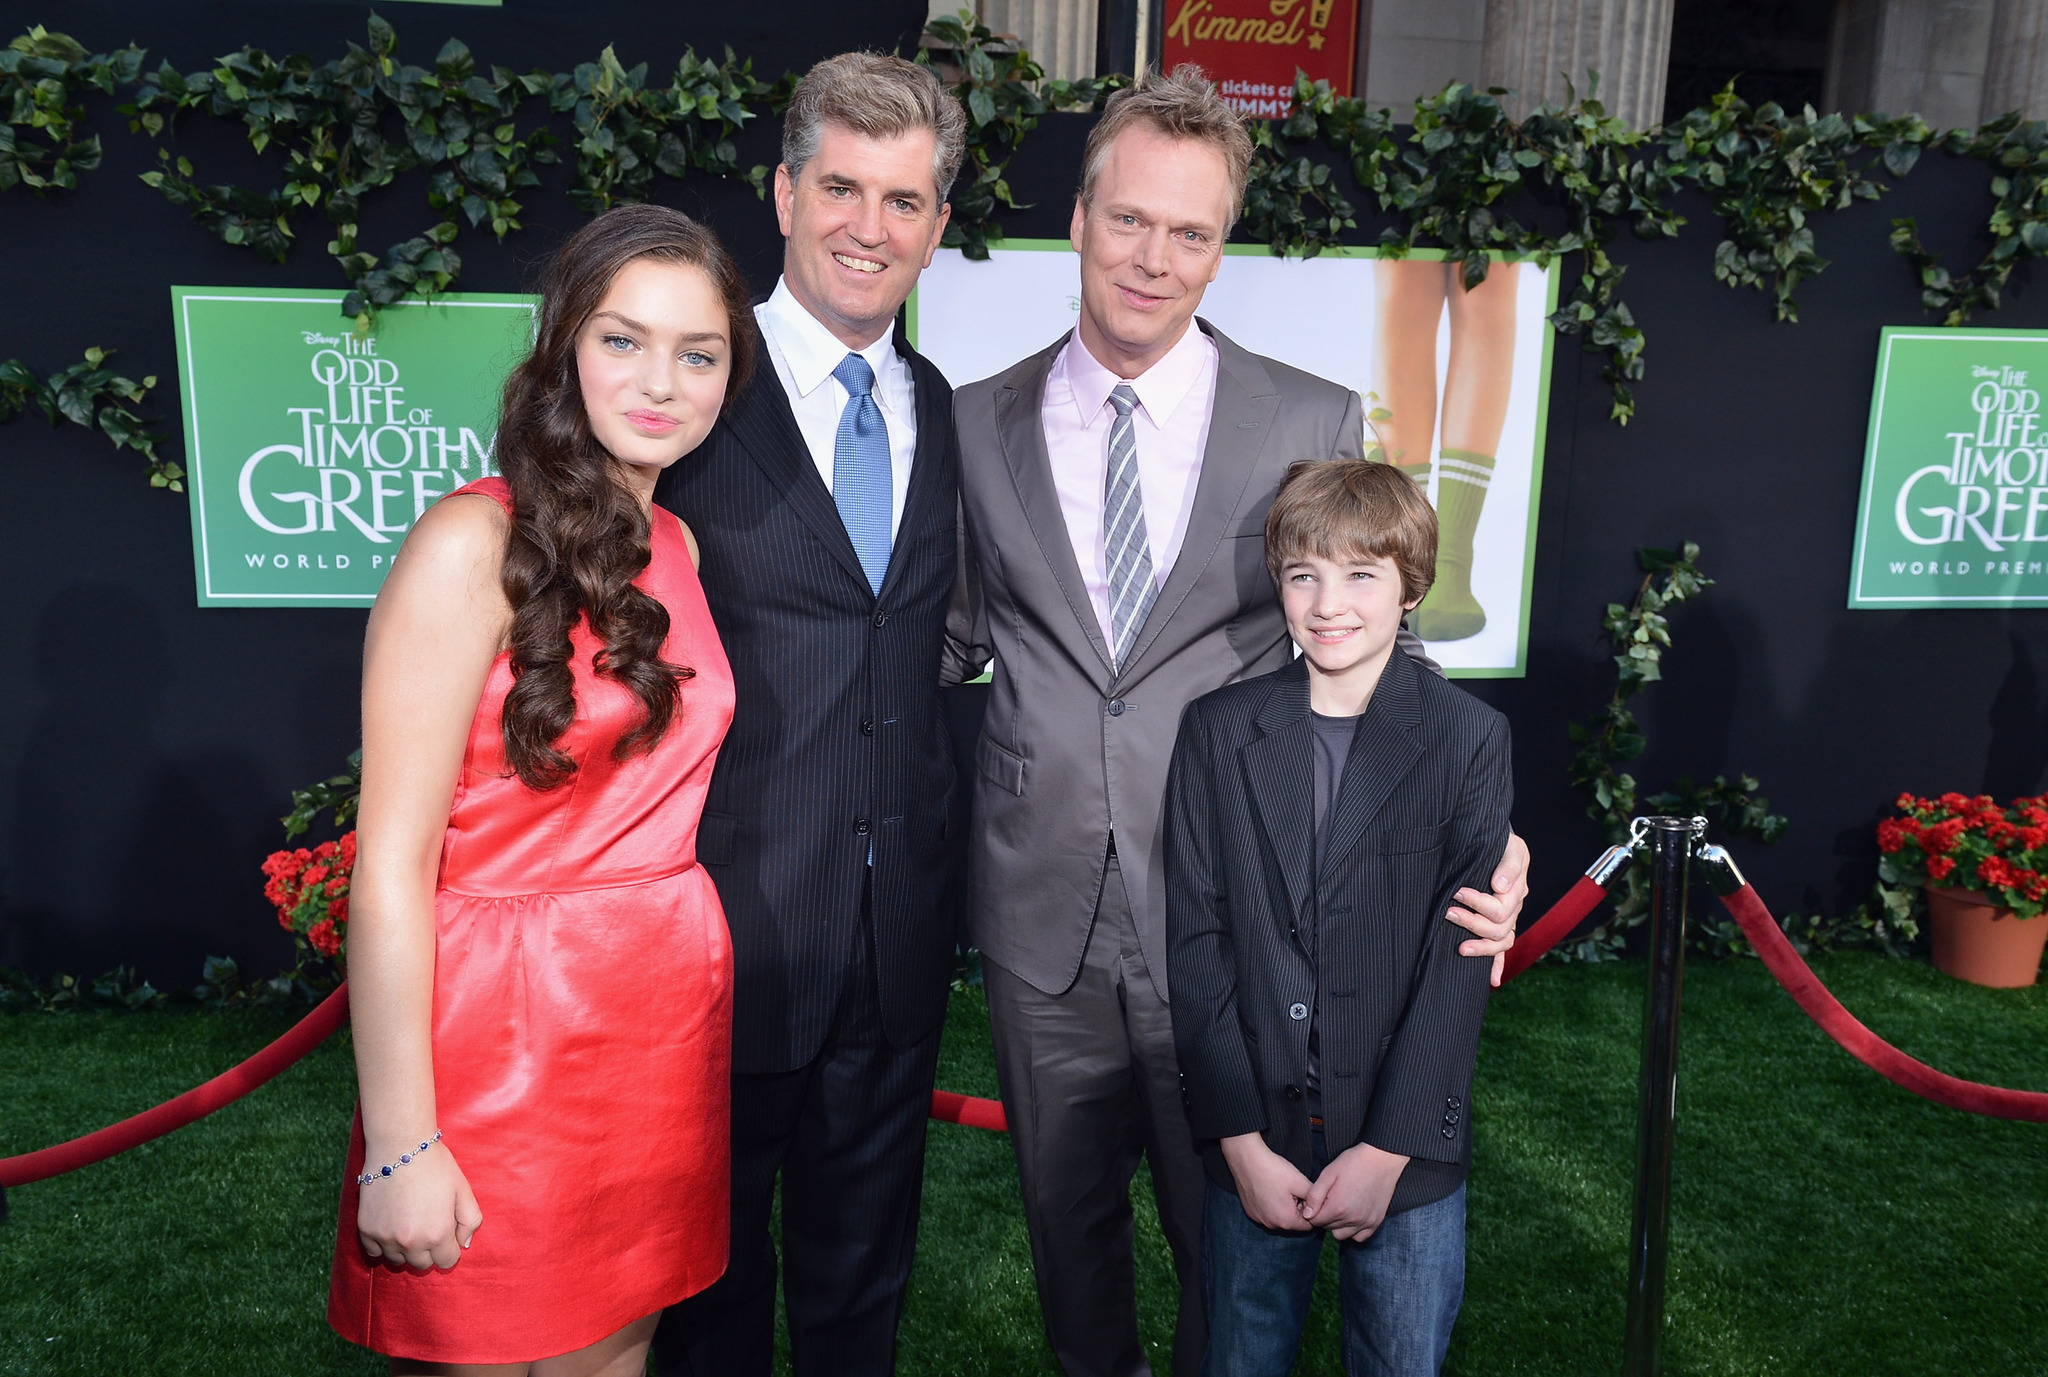 Peter Hedges, James Whitaker, CJ Adams and Odeya Rush at event of The Odd Life of Timothy Green (2012)